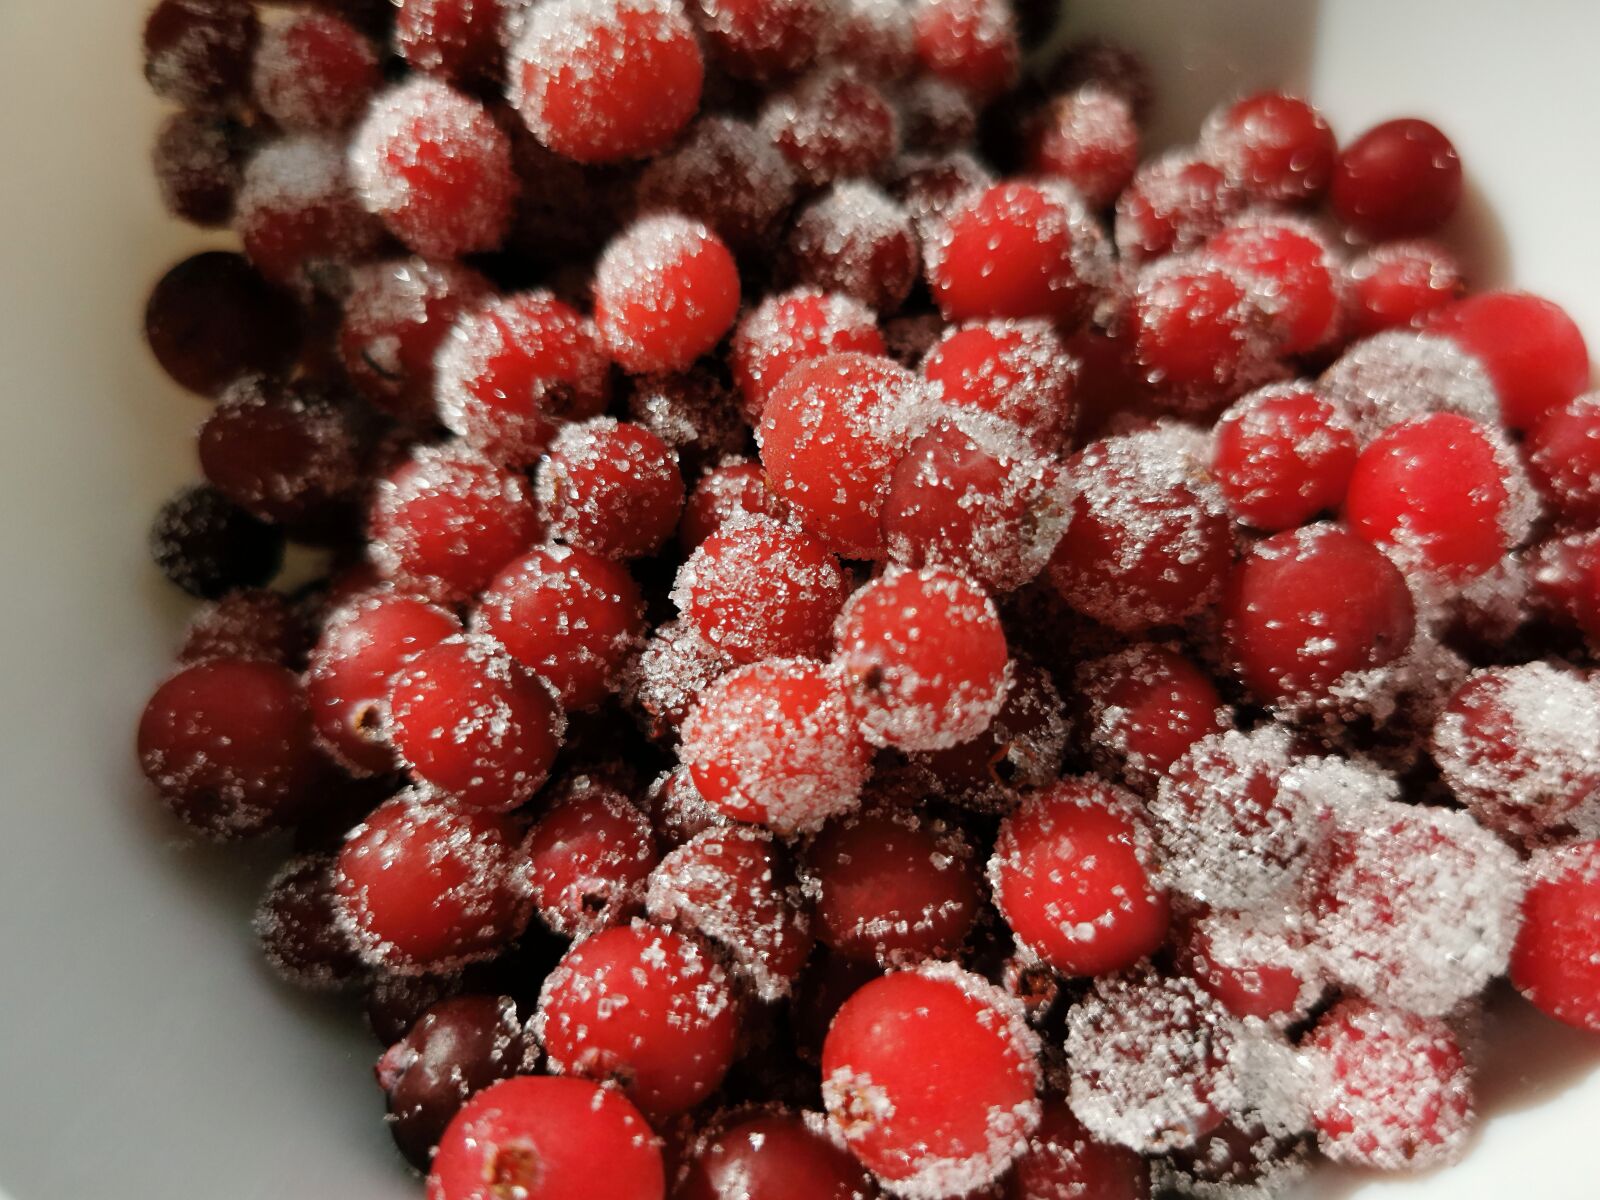 HUAWEI P30 Pro sample photo. Cranberry, sugar, red photography